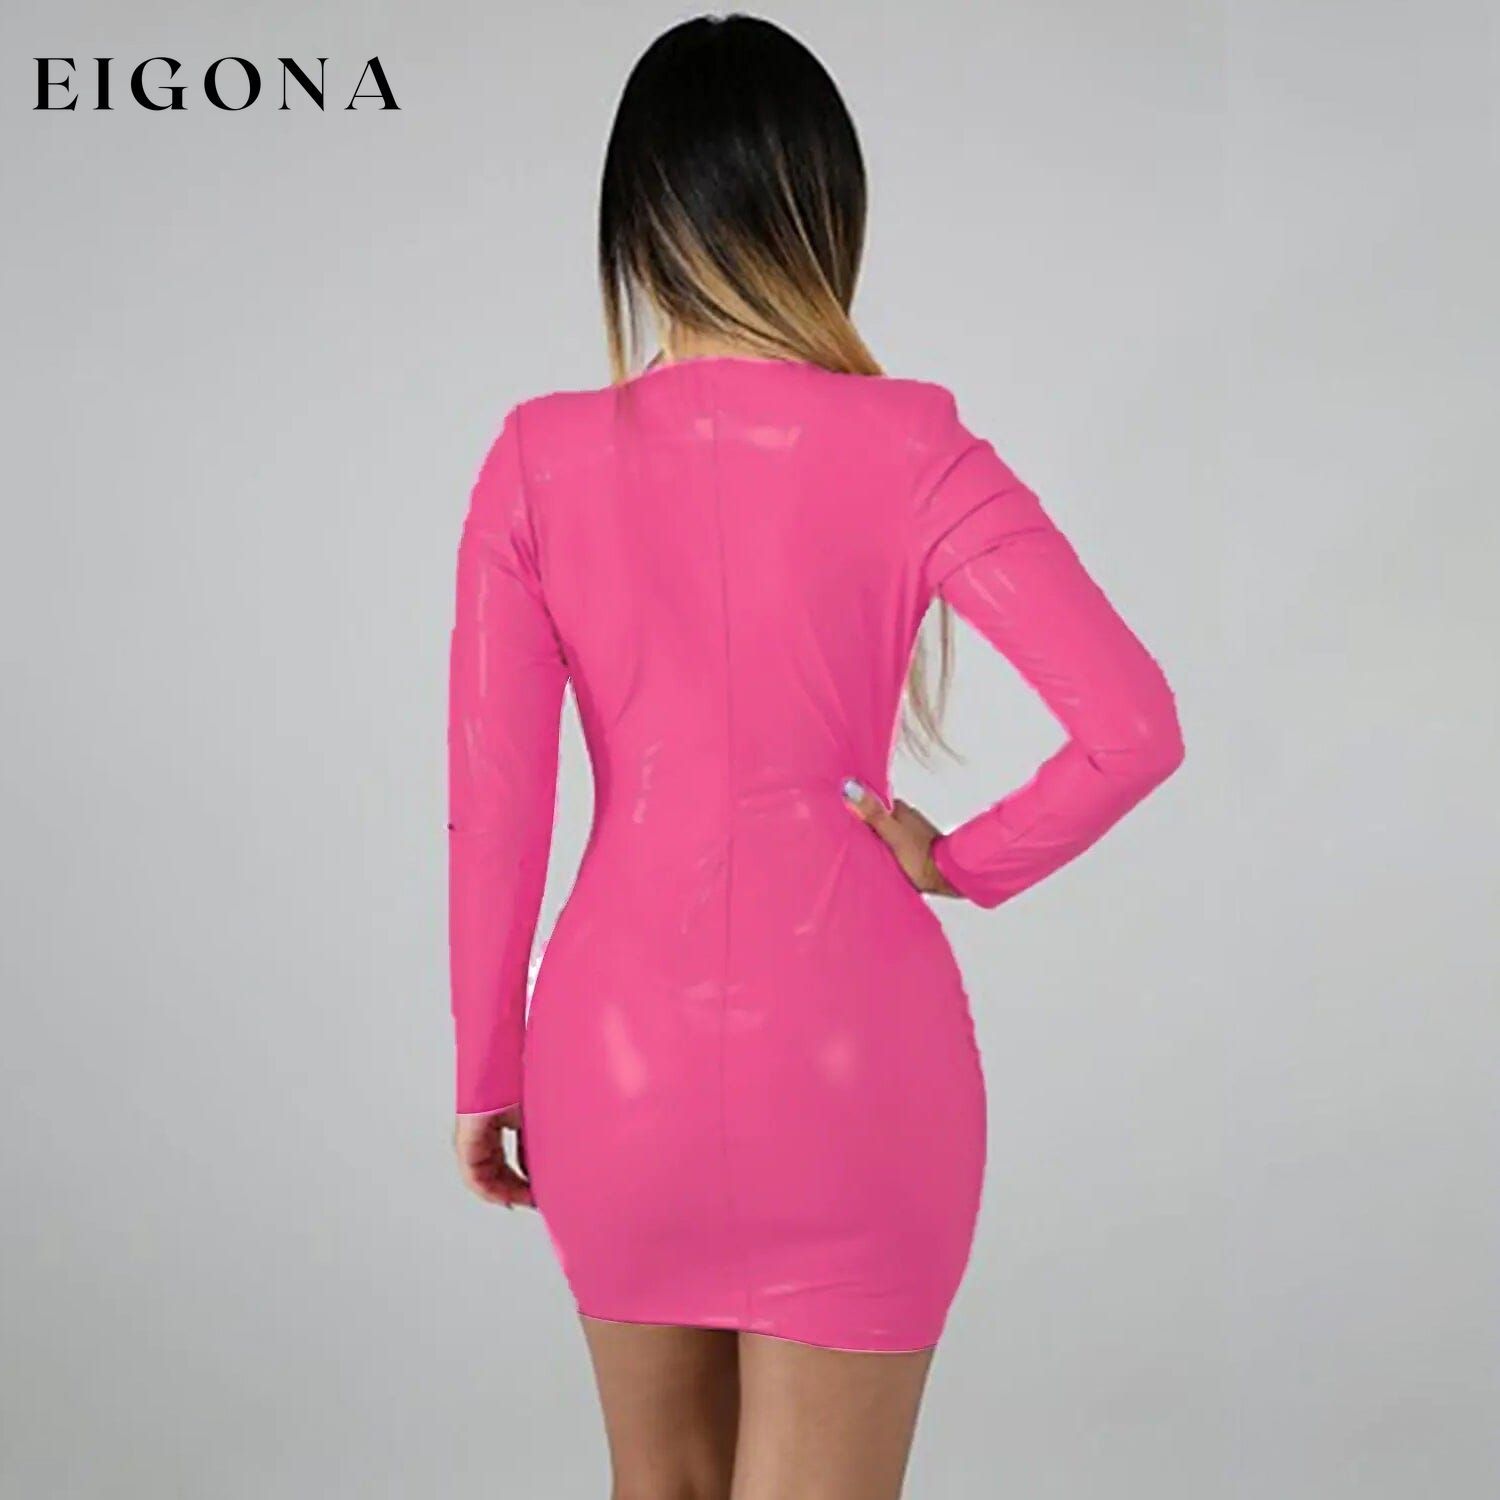 Women's Party Bodycon Long Sleeve Mini Dress __stock:200 casual dresses clothes dresses refund_fee:1200